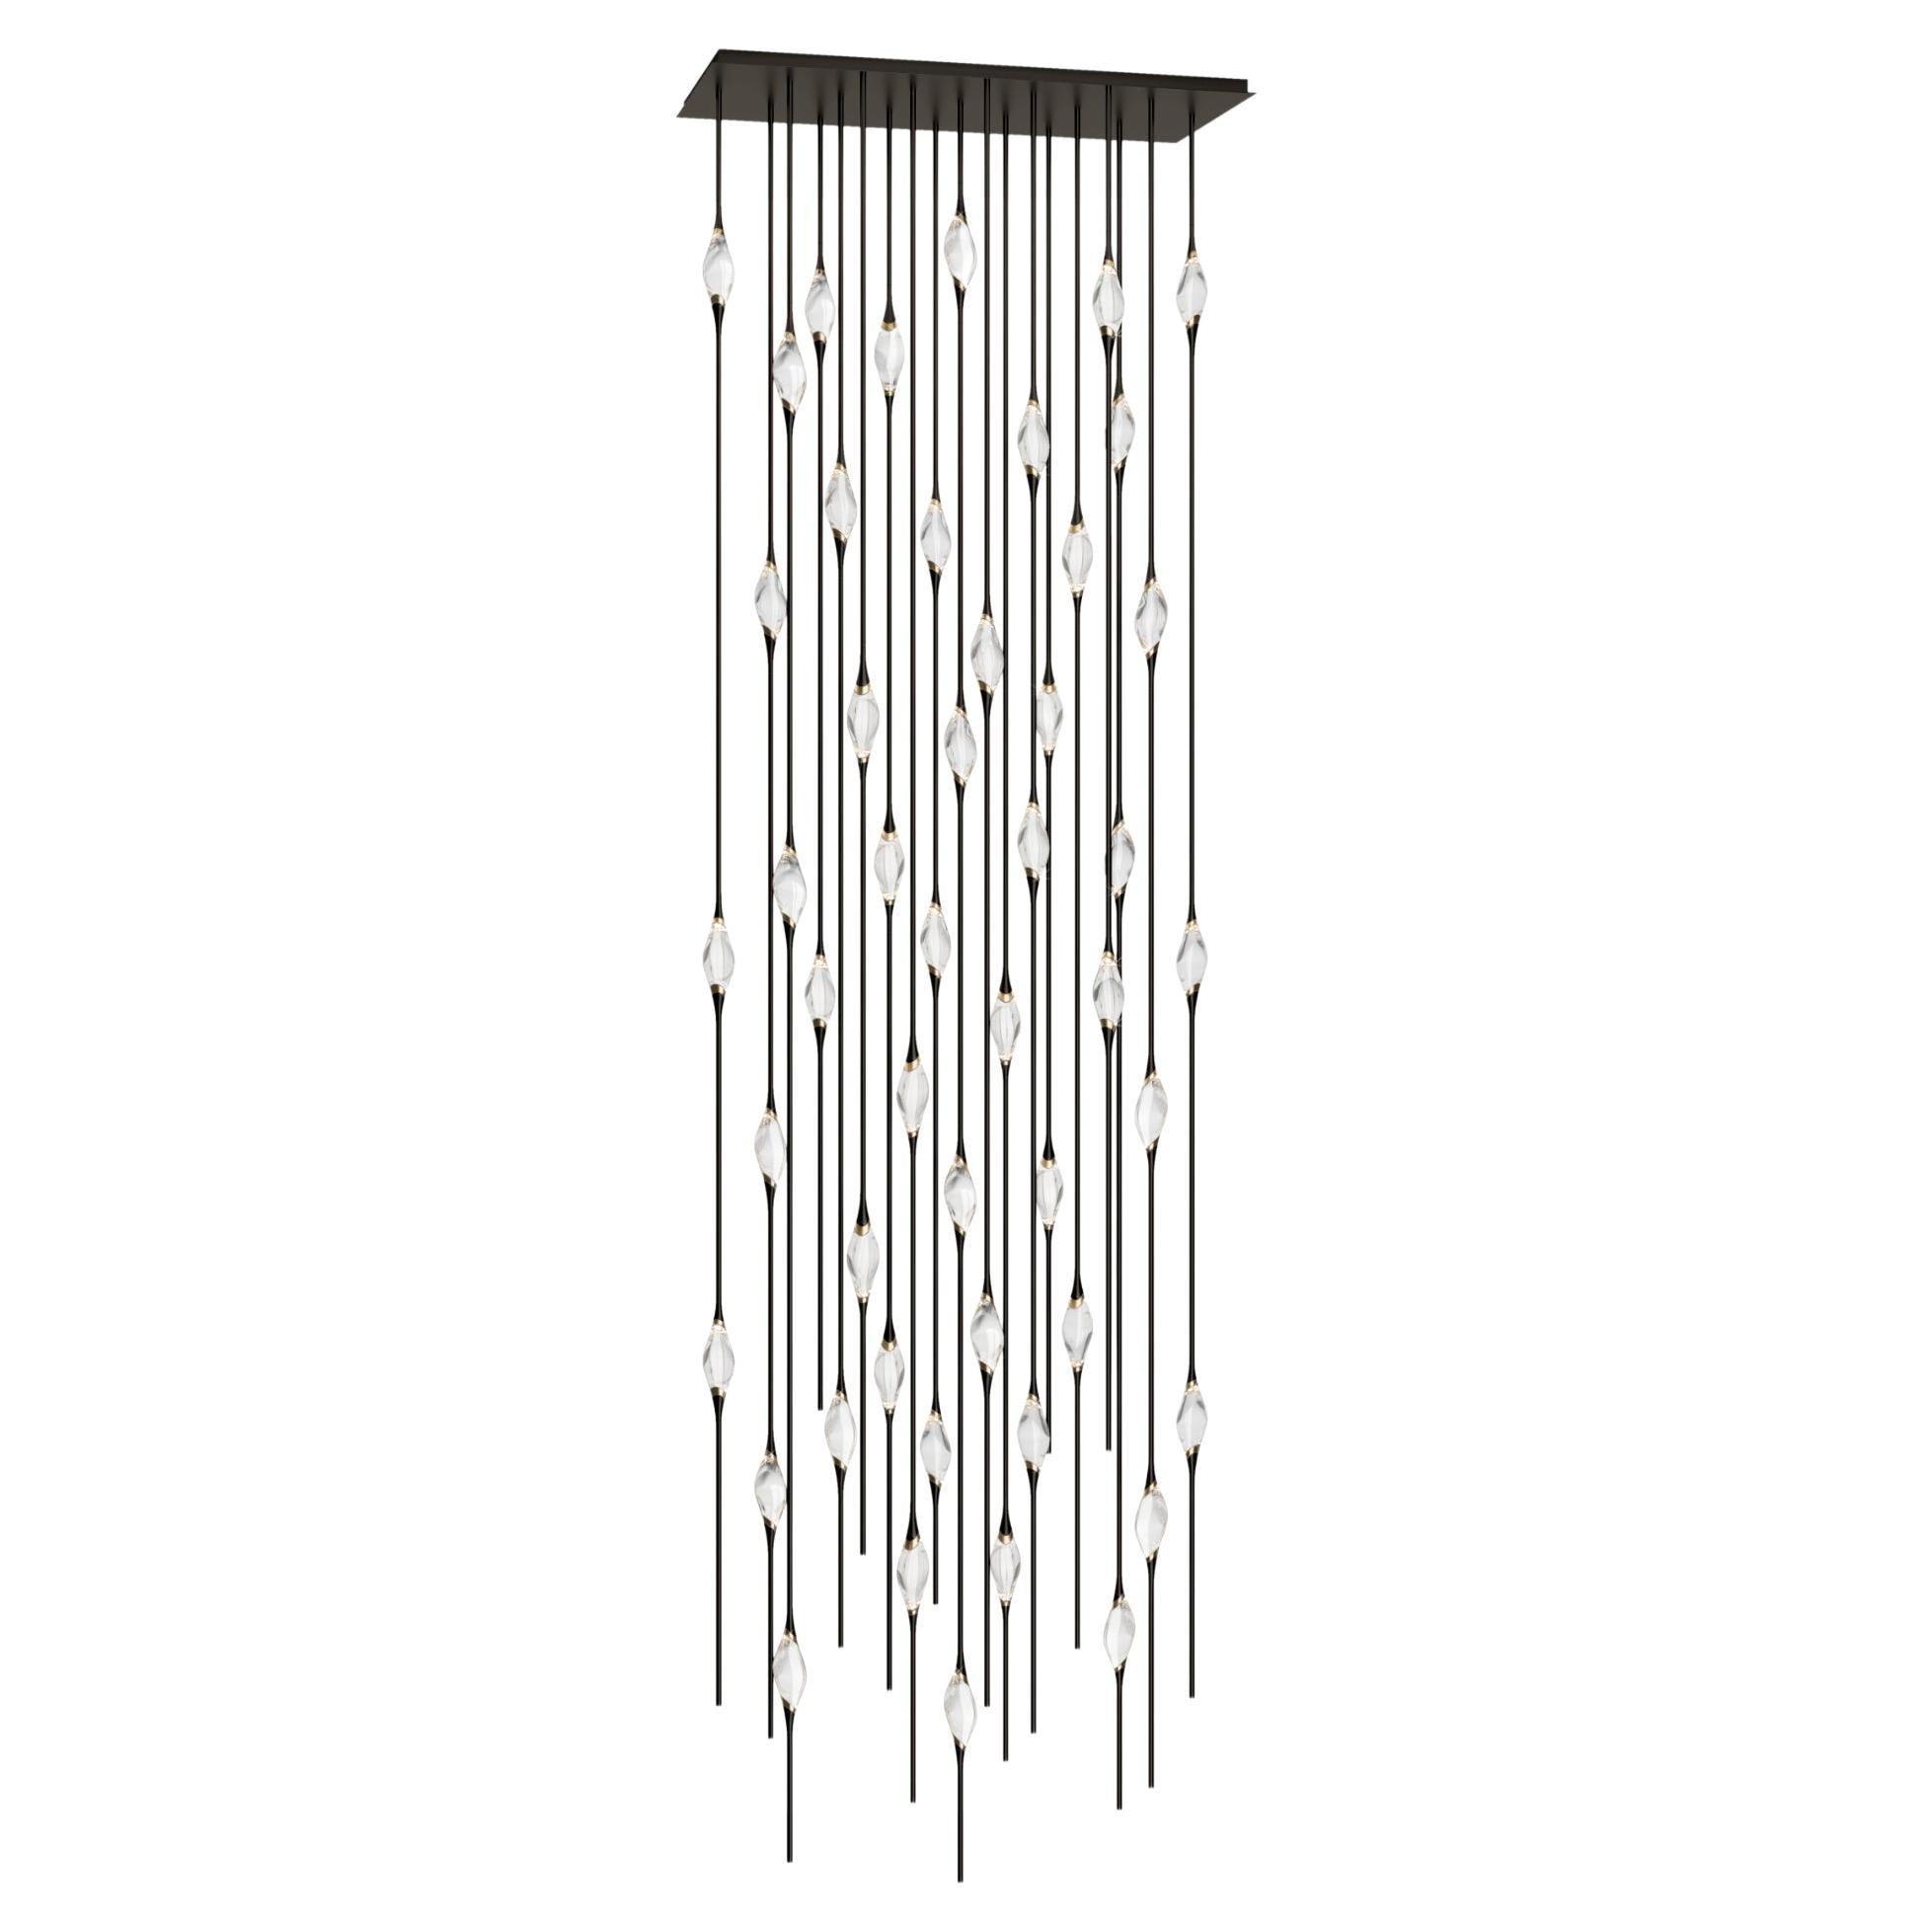 "Il Pezzo 12 Cluster Chandelier" - height 500cm/197" - black and polished brass For Sale